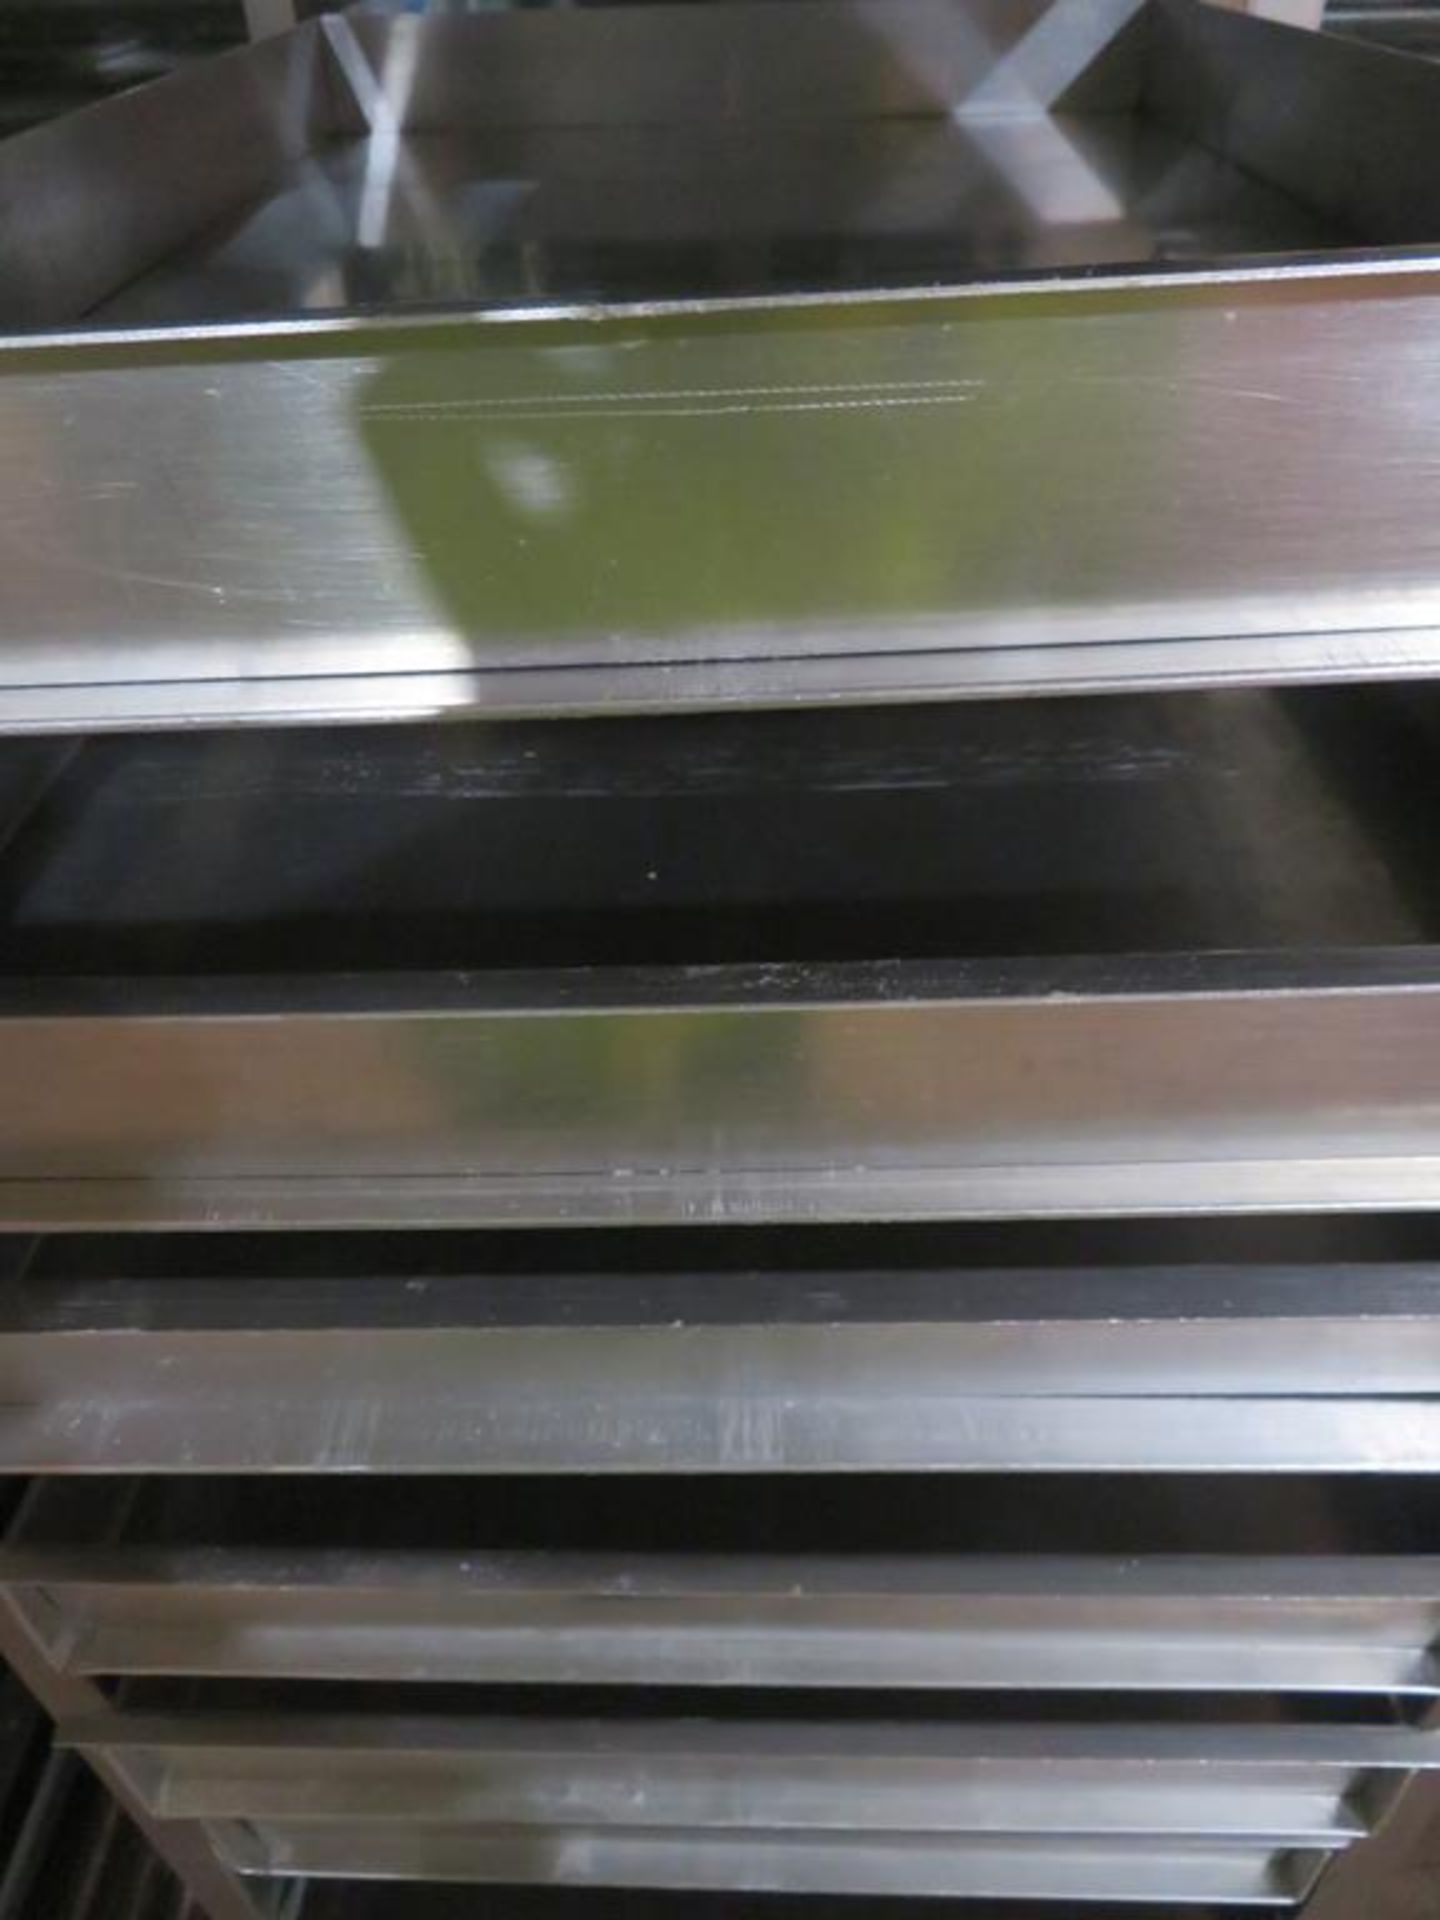 Bakers Rack - 16 Tray 600 x 400mm and 16 x Deep Aluminium Trays with Lift Out Fronts - Image 2 of 2